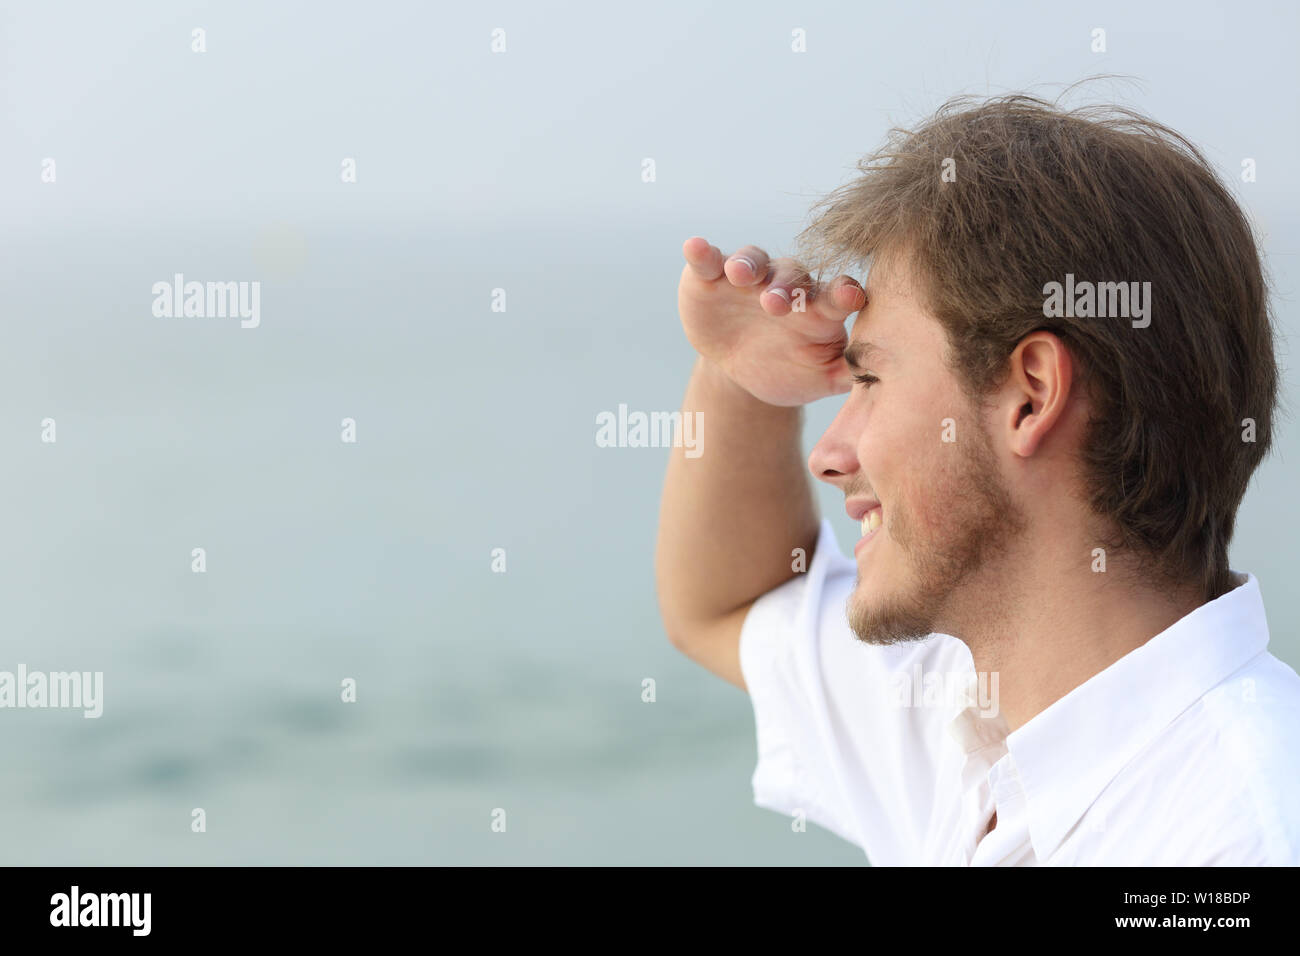 Happy man scouting looking away on the beach with hand on forehead Stock Photo